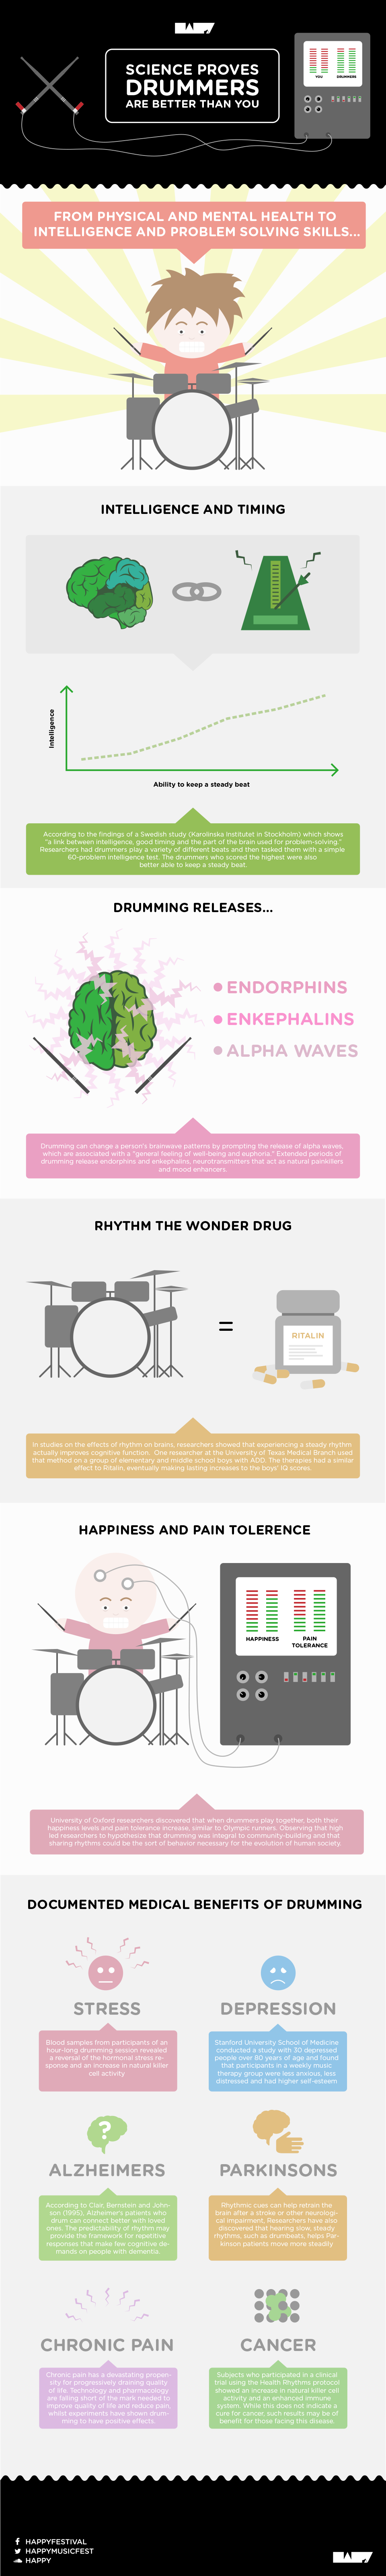 Drummers are healthier